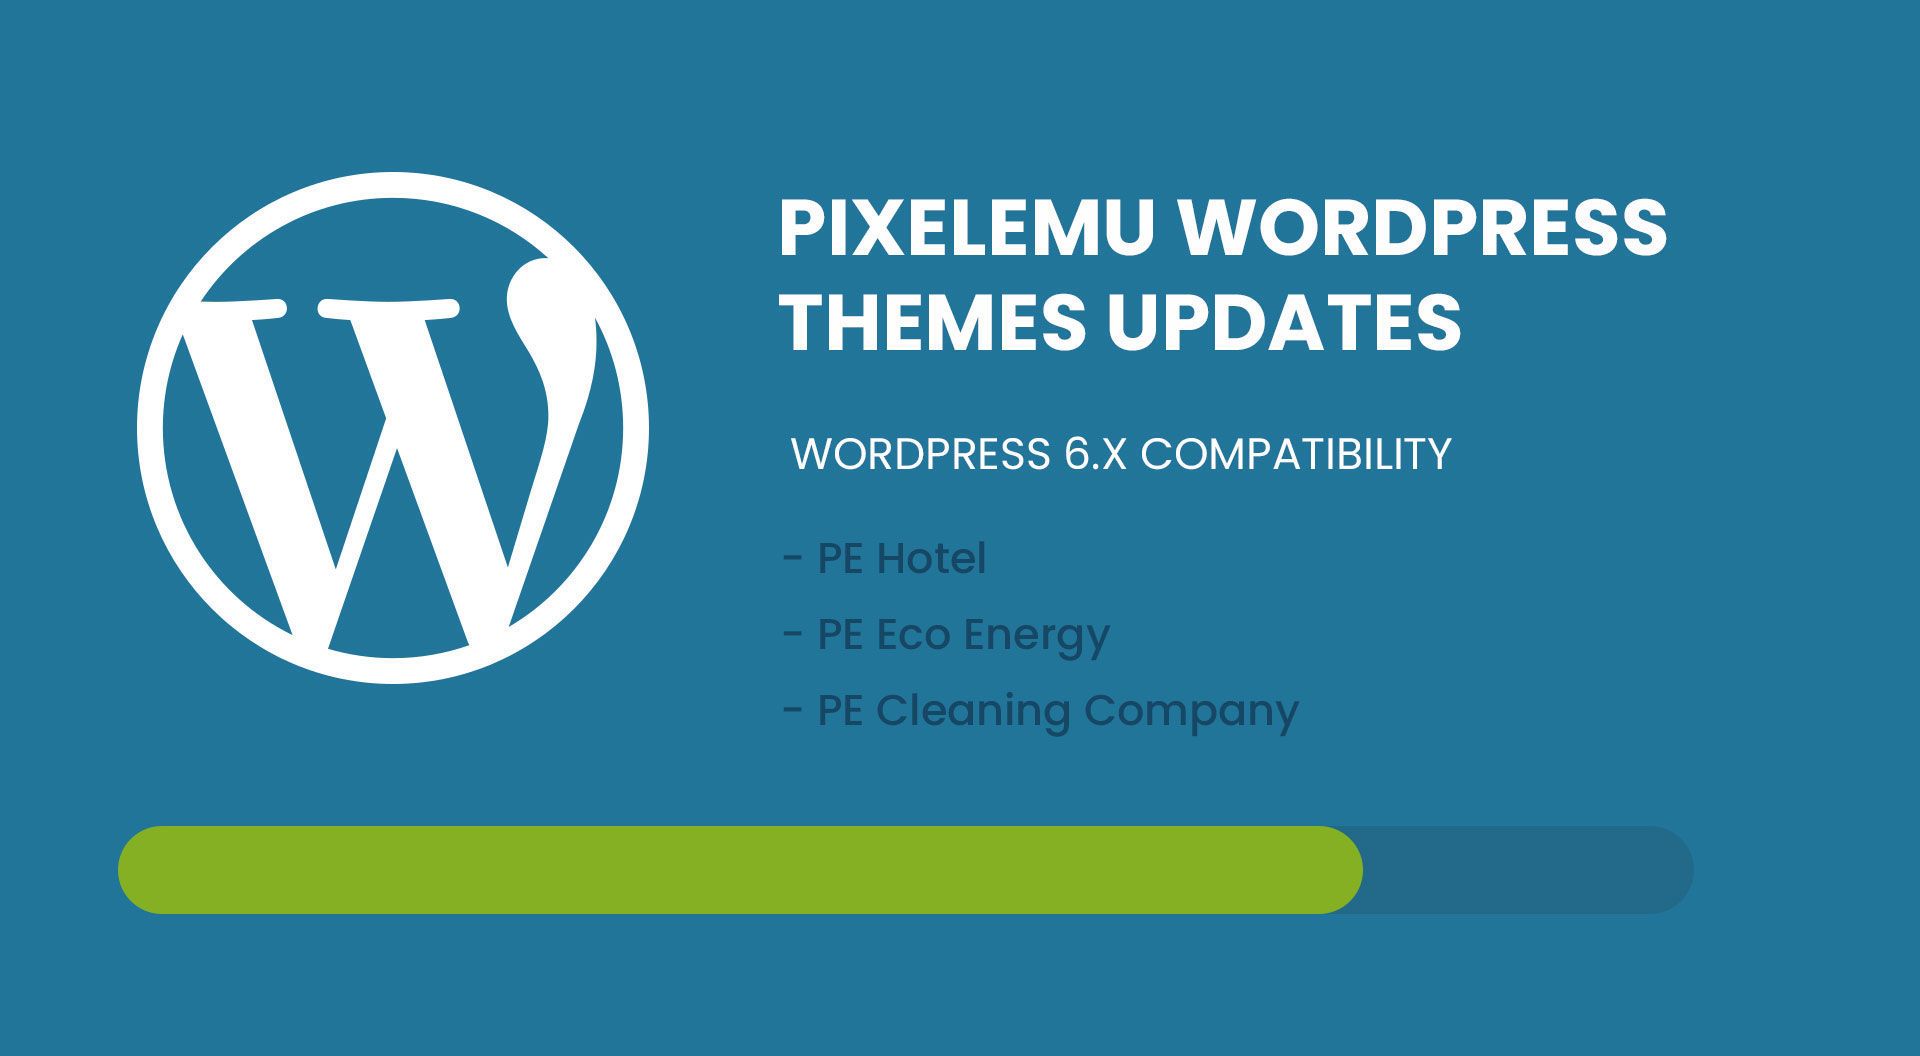 Another 3 PixelEmu WordPress themes are now compatible with the WordPress 6.x